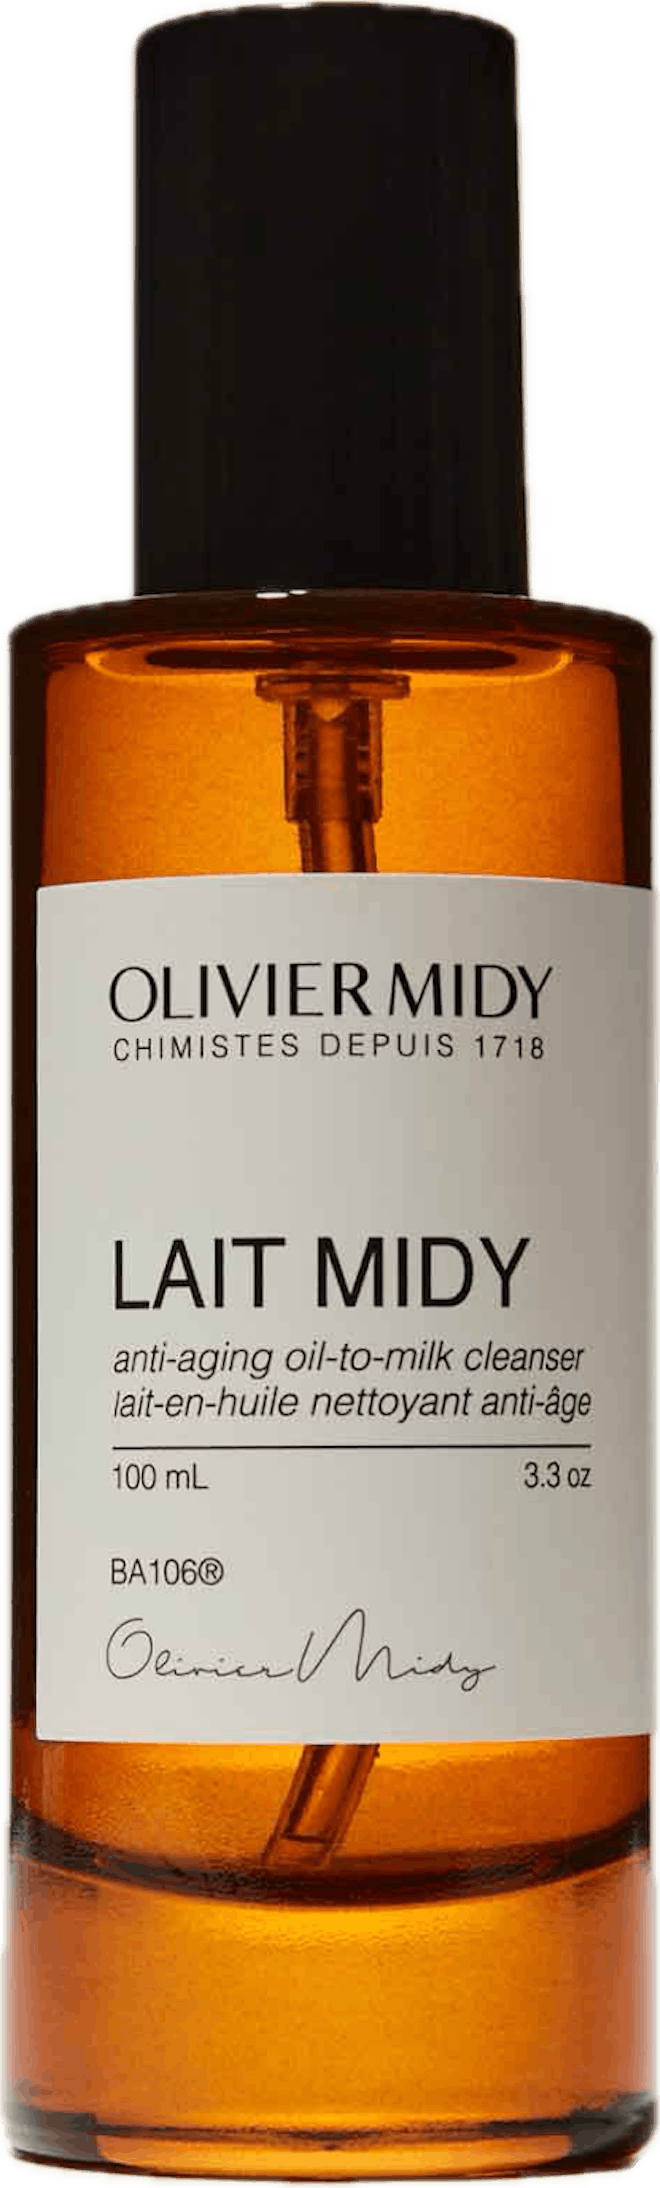 Lait Midy Oil-to-Milk Face Cleanser